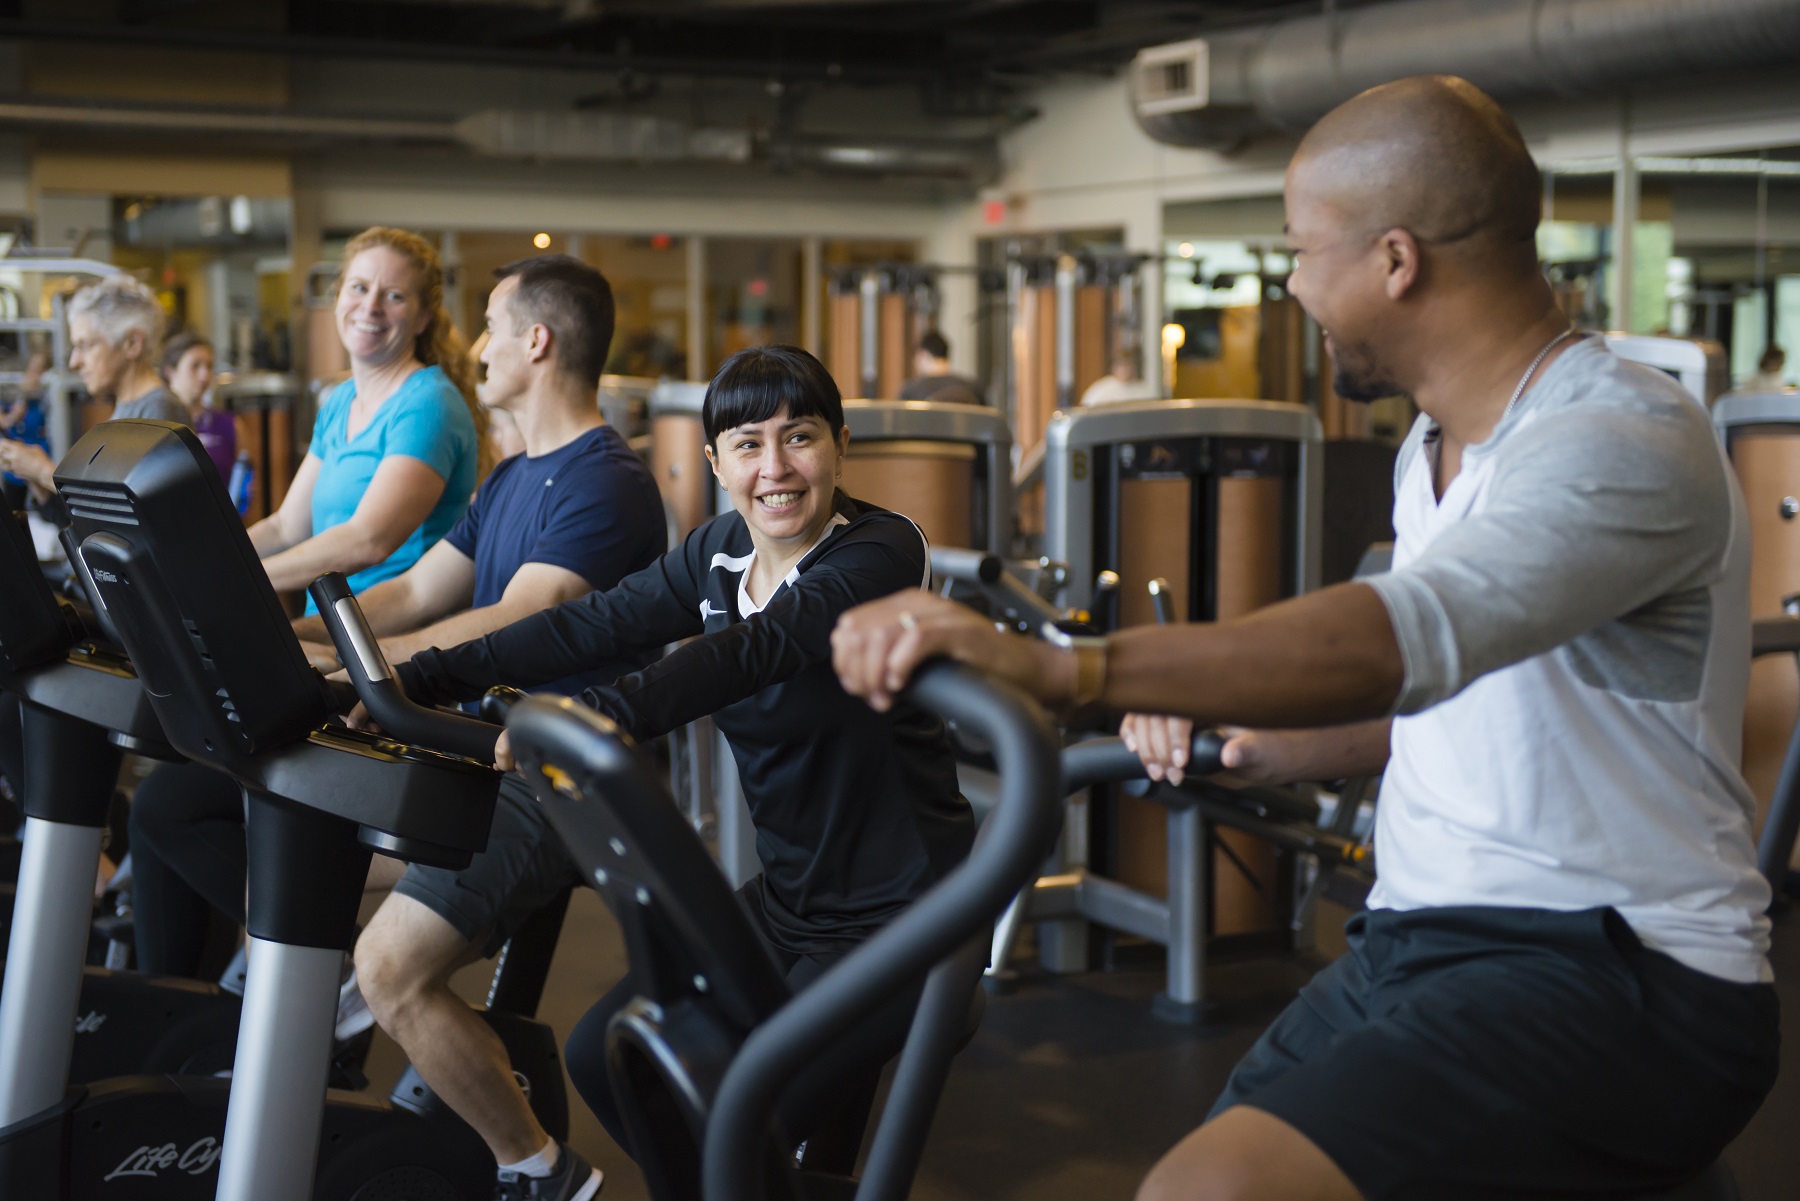 Row of 4 members on stationary bikes on march wellness & fitness center's fitness floor.